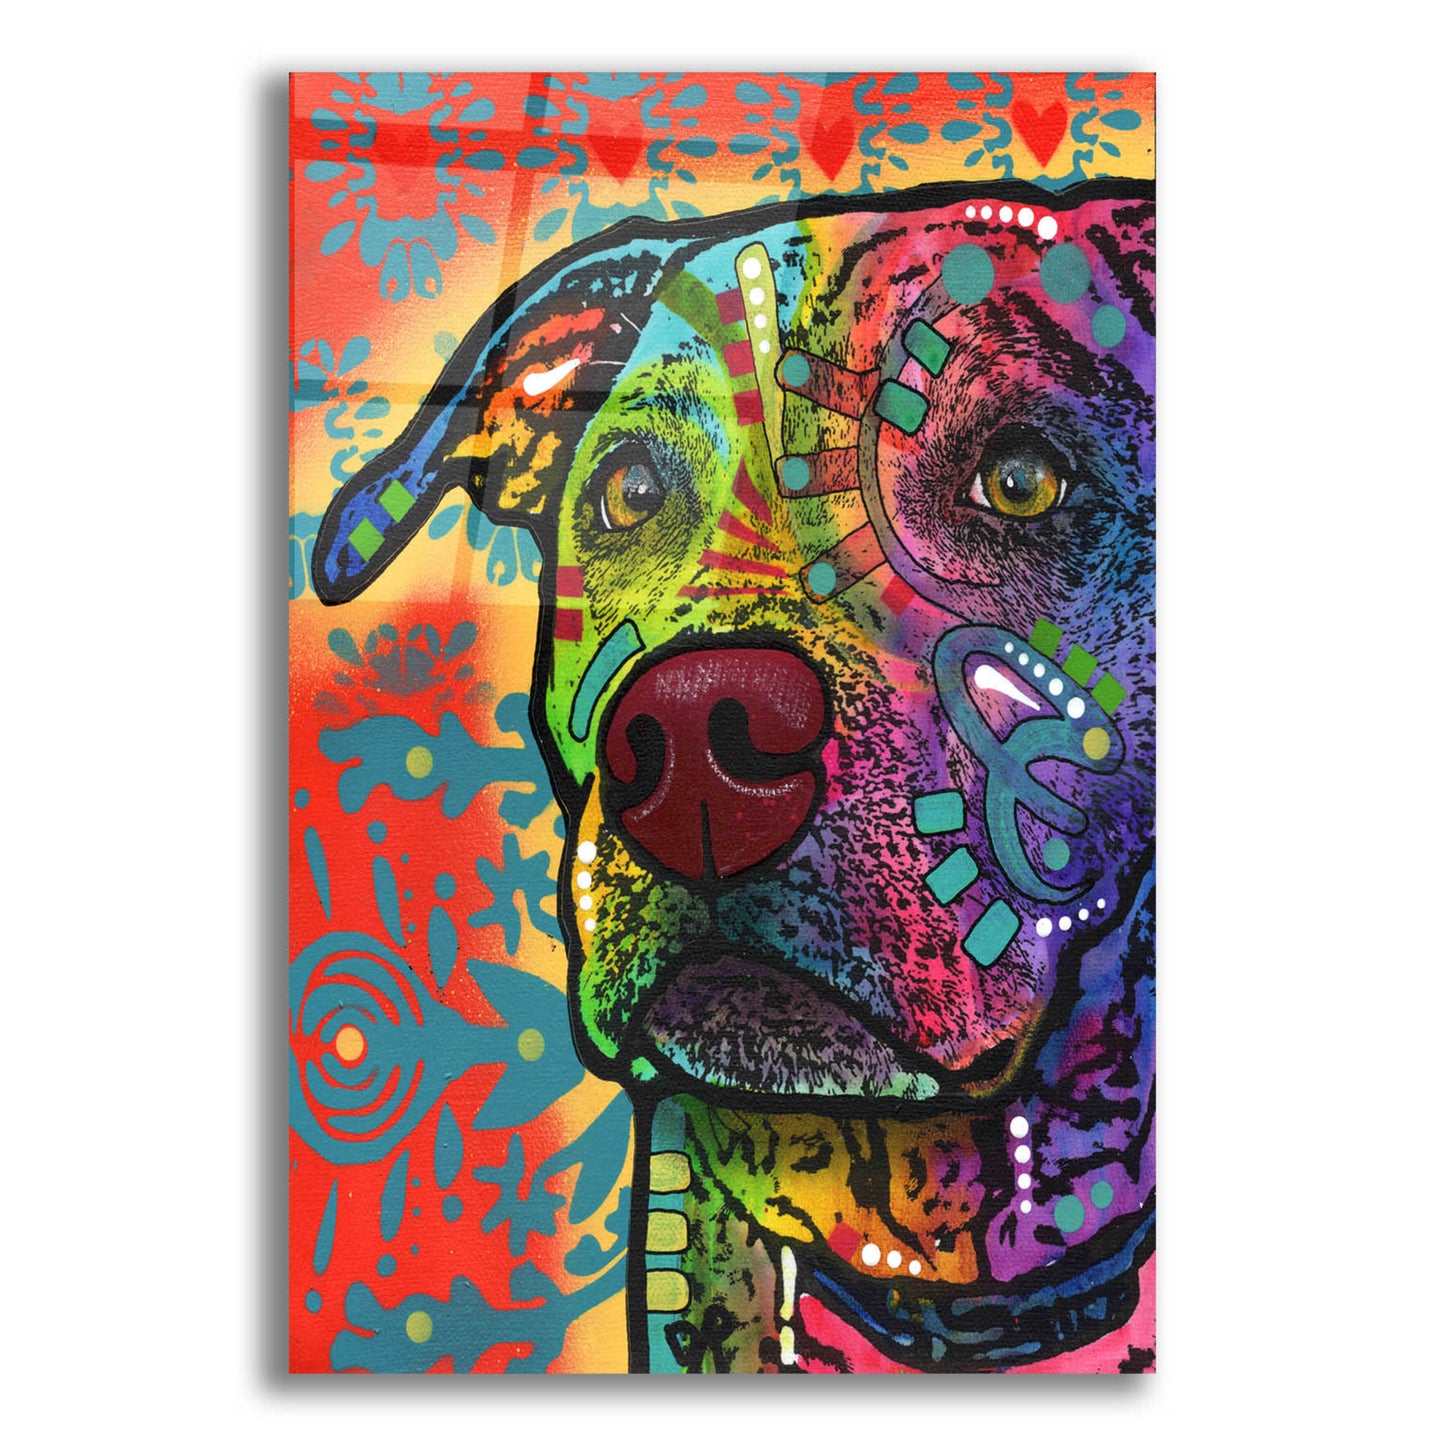 Epic Art 'Huckleberry' by Dean Russo, Acrylic Glass Wall Art,12x16